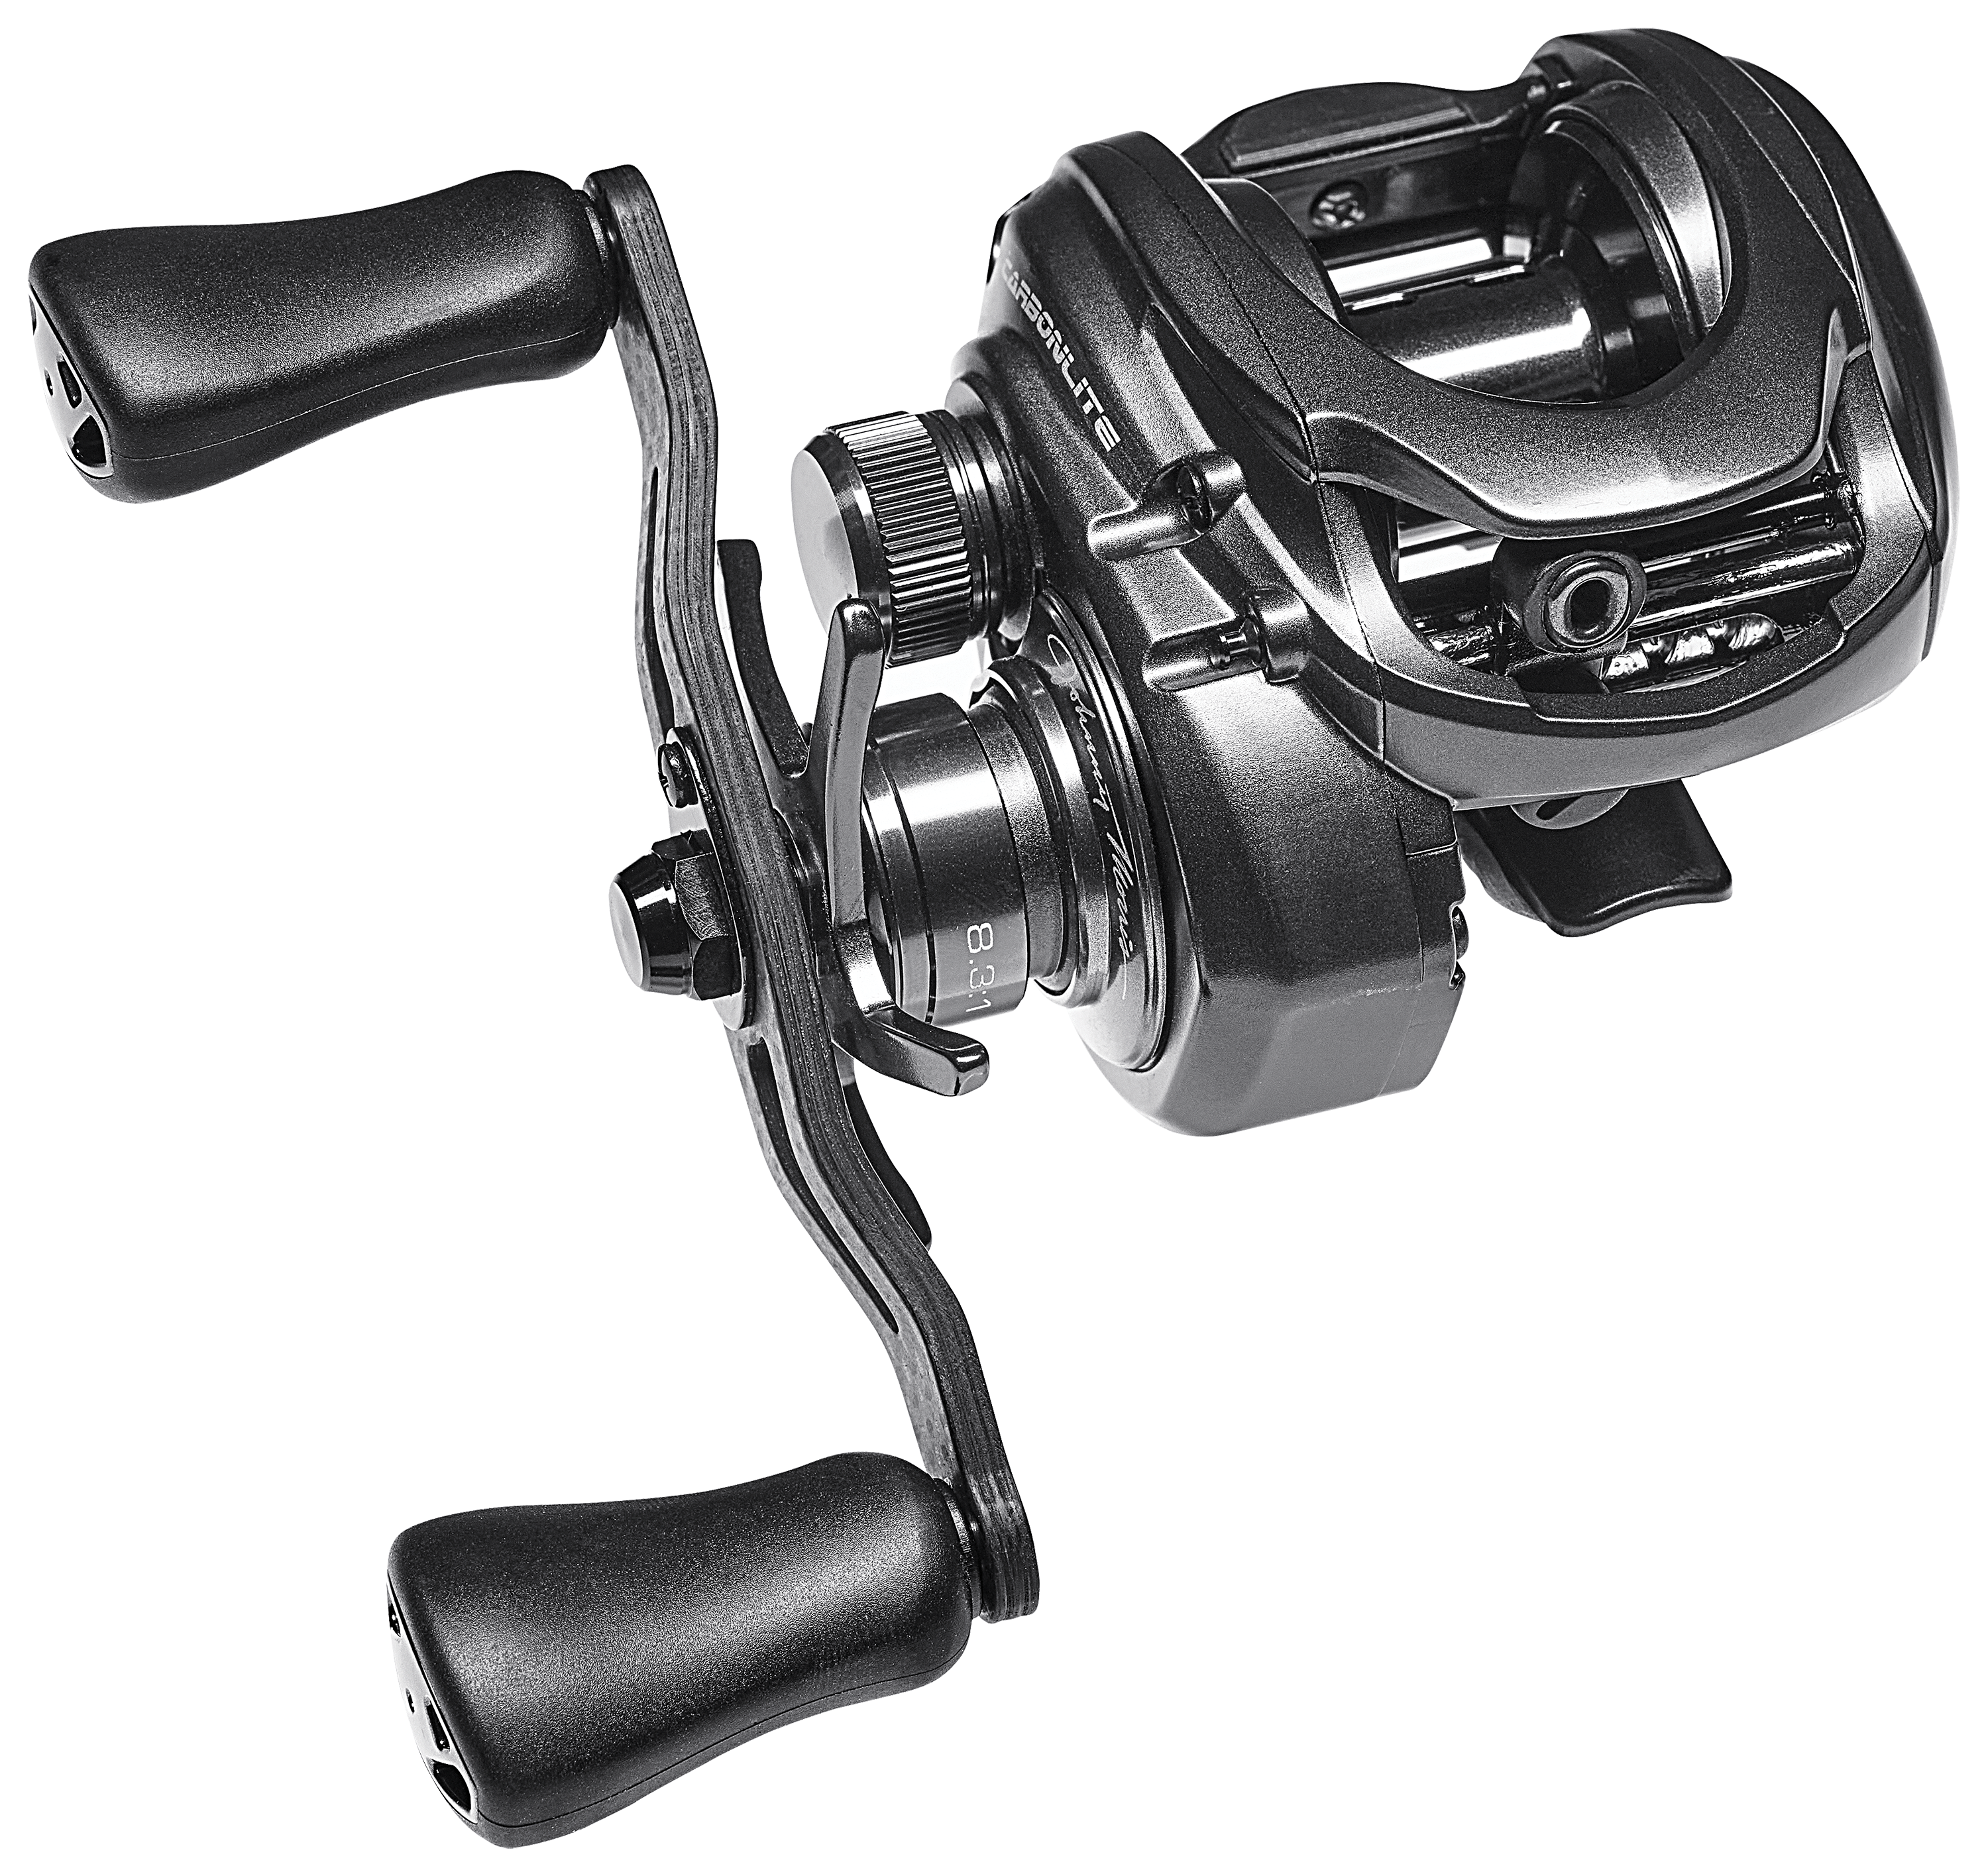 Bass Pro Shops Johnny Morris Signature Series Spinning Reel - 5.7